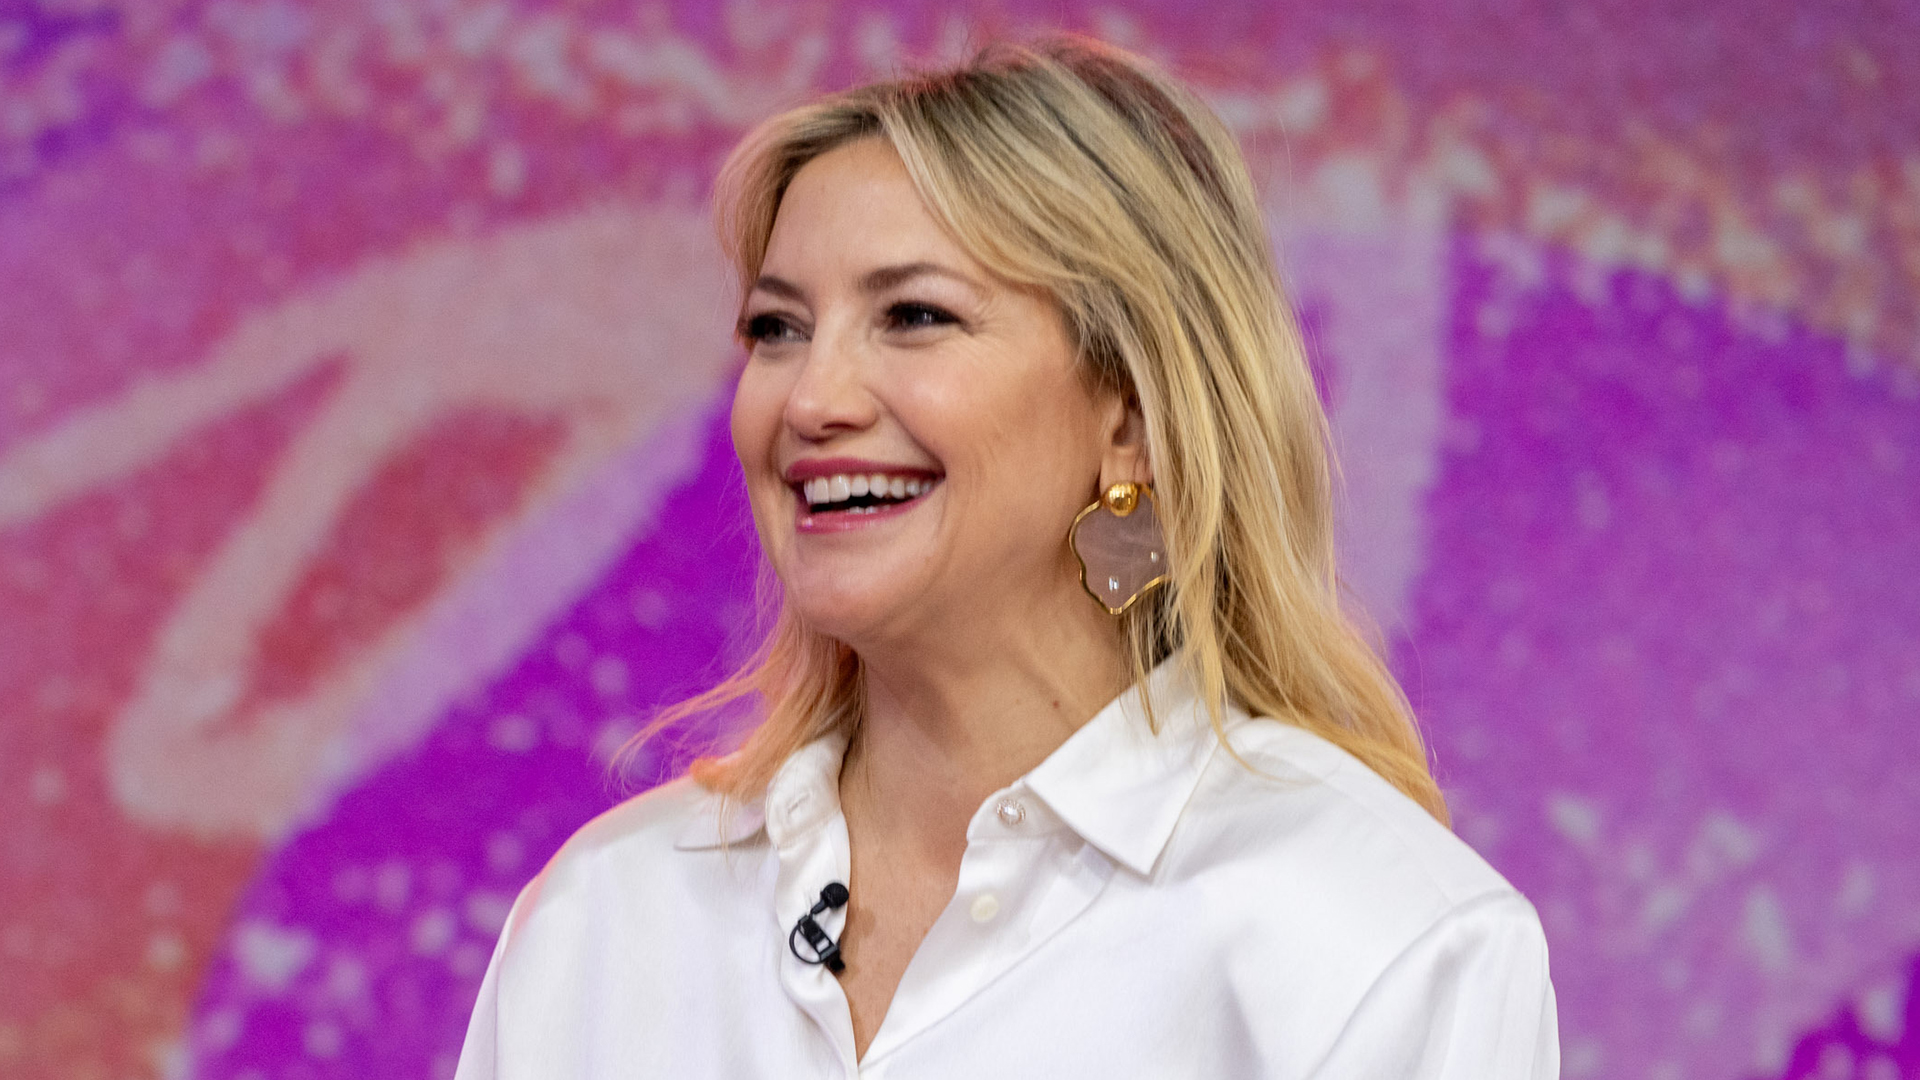 Kate Hudson: 'I'm just so happy' I decided to release an album